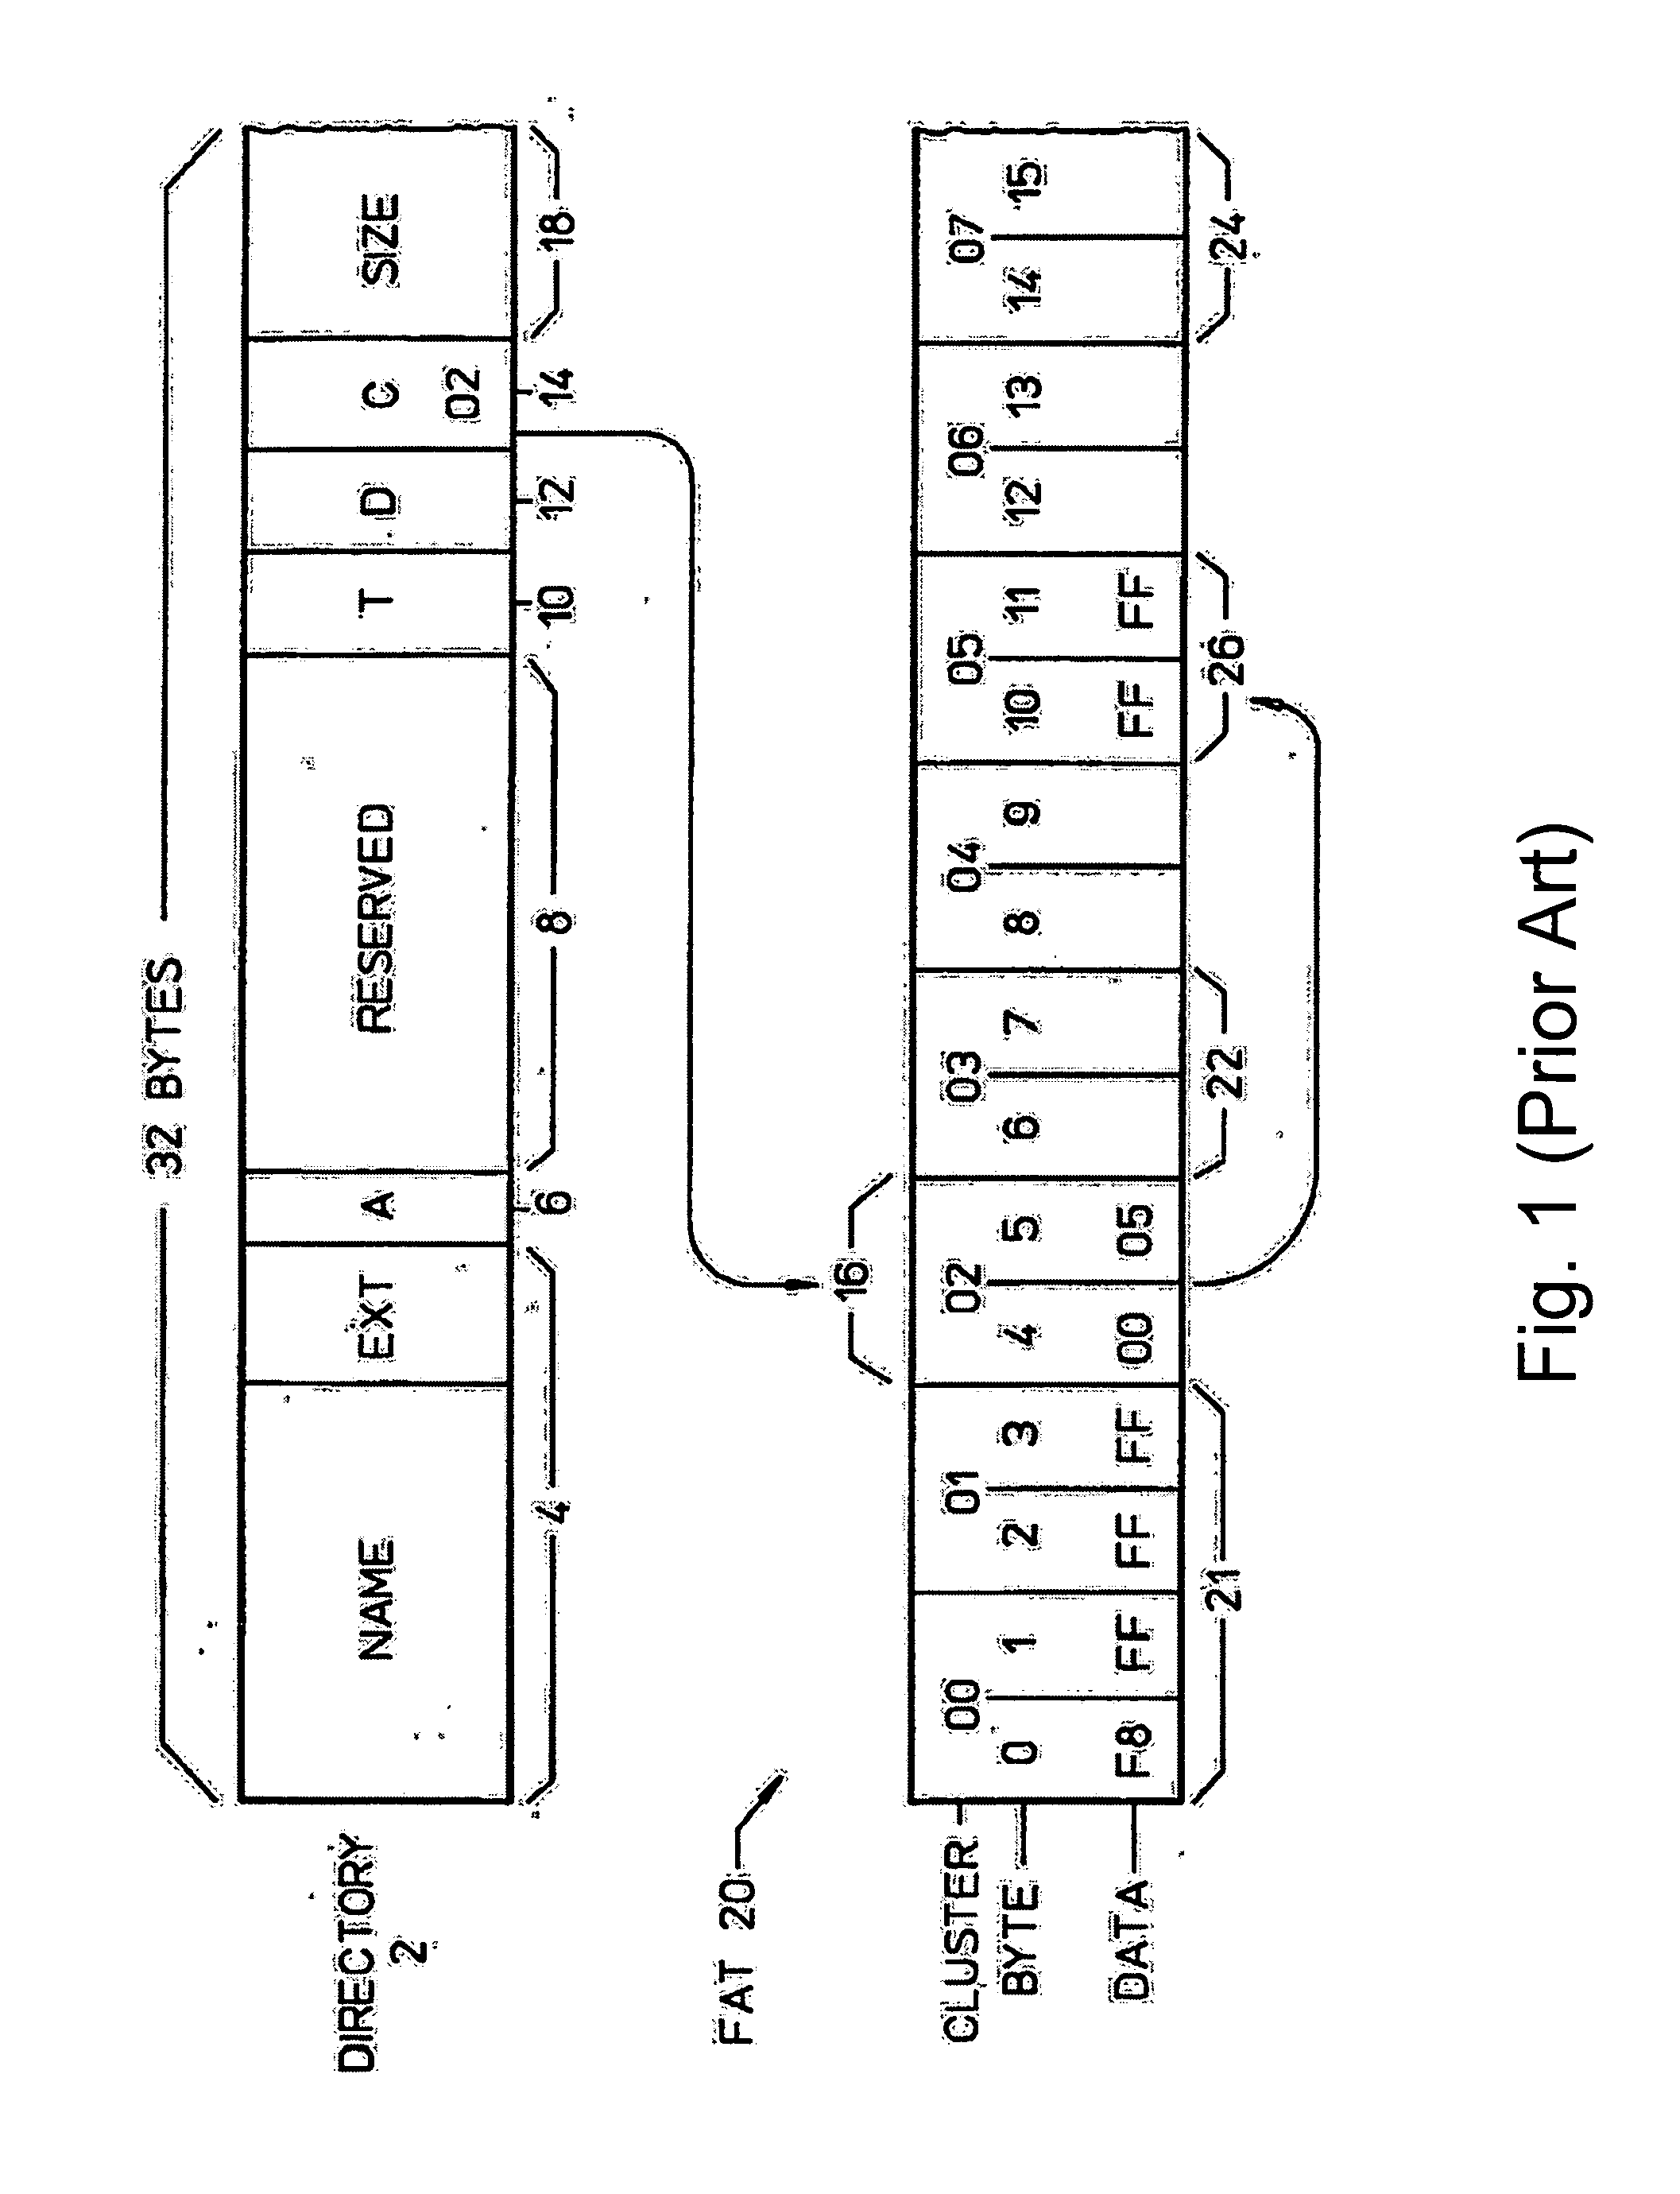 System and method for performing an image level snapshot and for restoring partial volume data